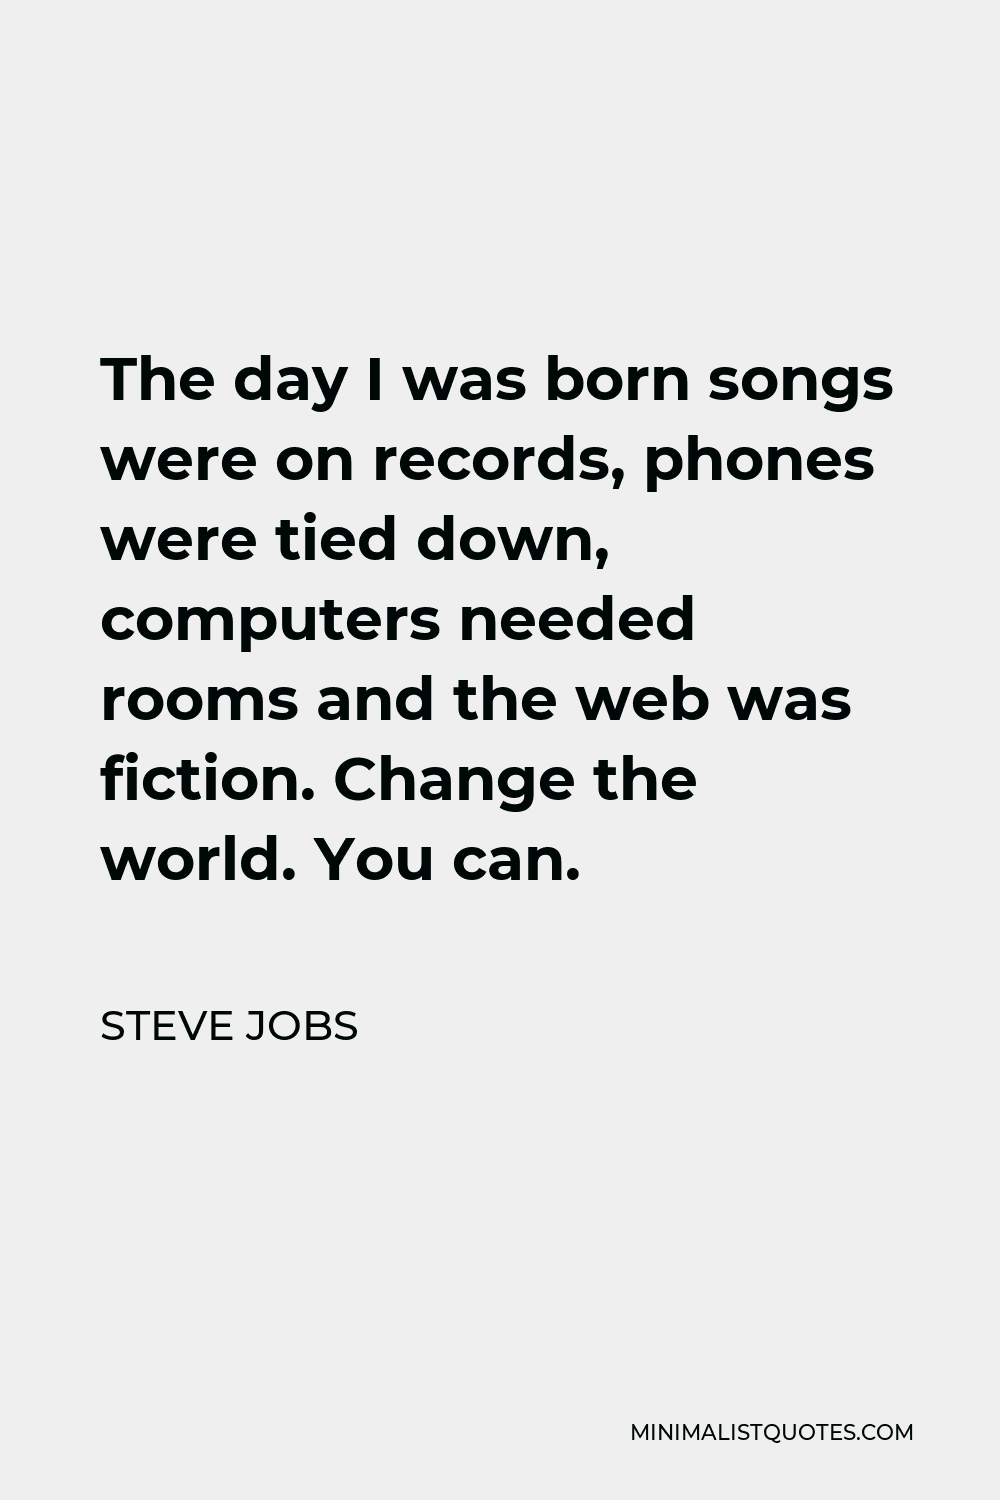 Steve Jobs Quote - The day I was born songs were on records, phones were tied down, computers needed rooms and the web was fiction. Change the world. You can.